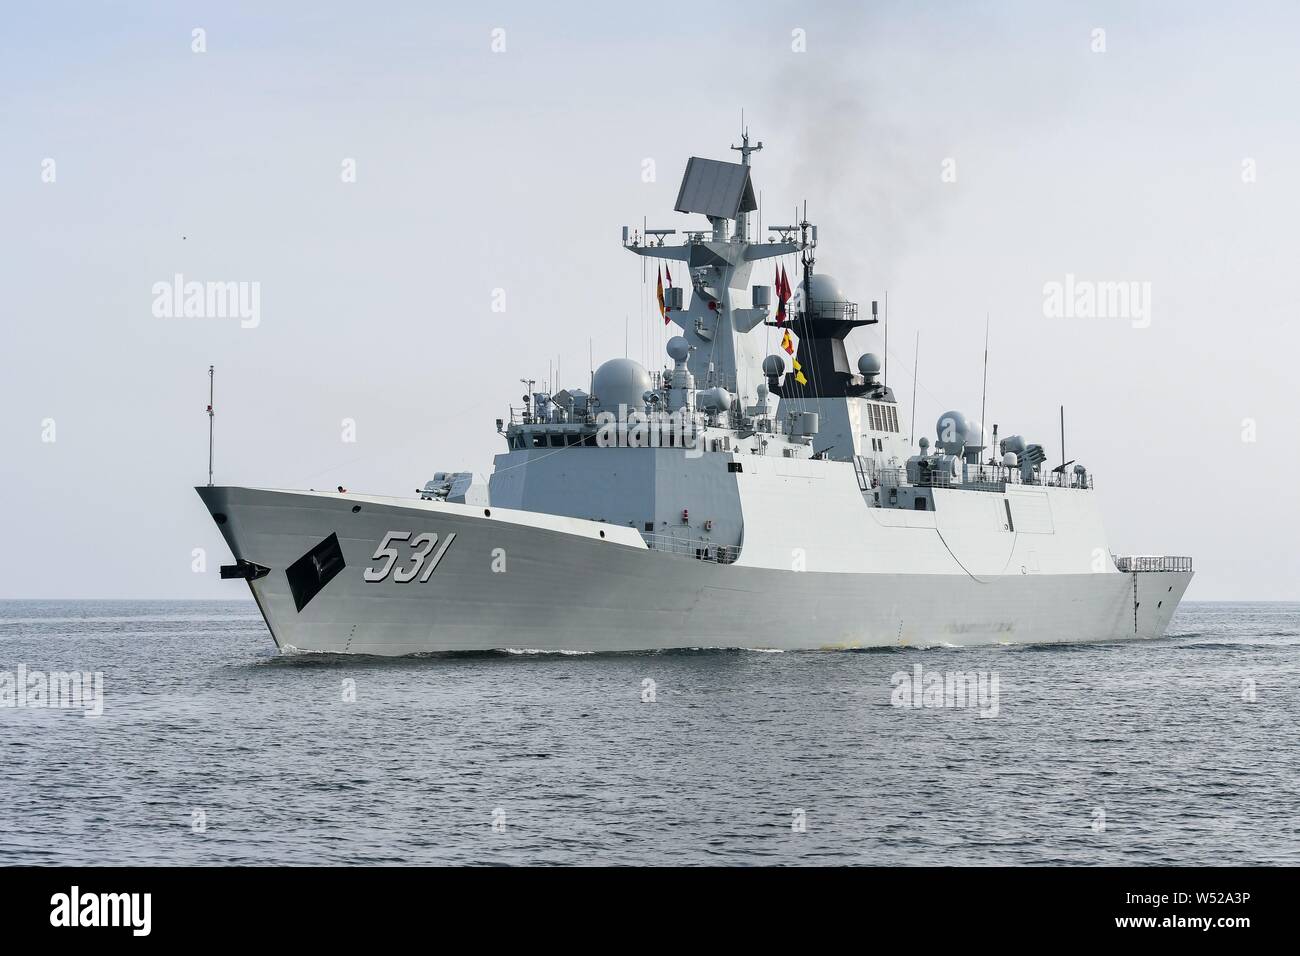 A frigate of the type 54A (NATO: Jiangkai II), the F 531 'Xiangtan', enters Kieler Woche on occasion of the Kieler Woche. The ships of the type 54A are modern multipurpose frigates which are built in large numbers. They are relatively inexpensive and are also exported to Pakistan. Much of the electronic equipment and armament of these ships is still based on Russian technology. The Navy of the People's Republic of China has been for years to modernize its fleet and expand. The goal is to transform the fleet from a pure coastal defense fleet into a global fleet. As part of this, China has been Stock Photo